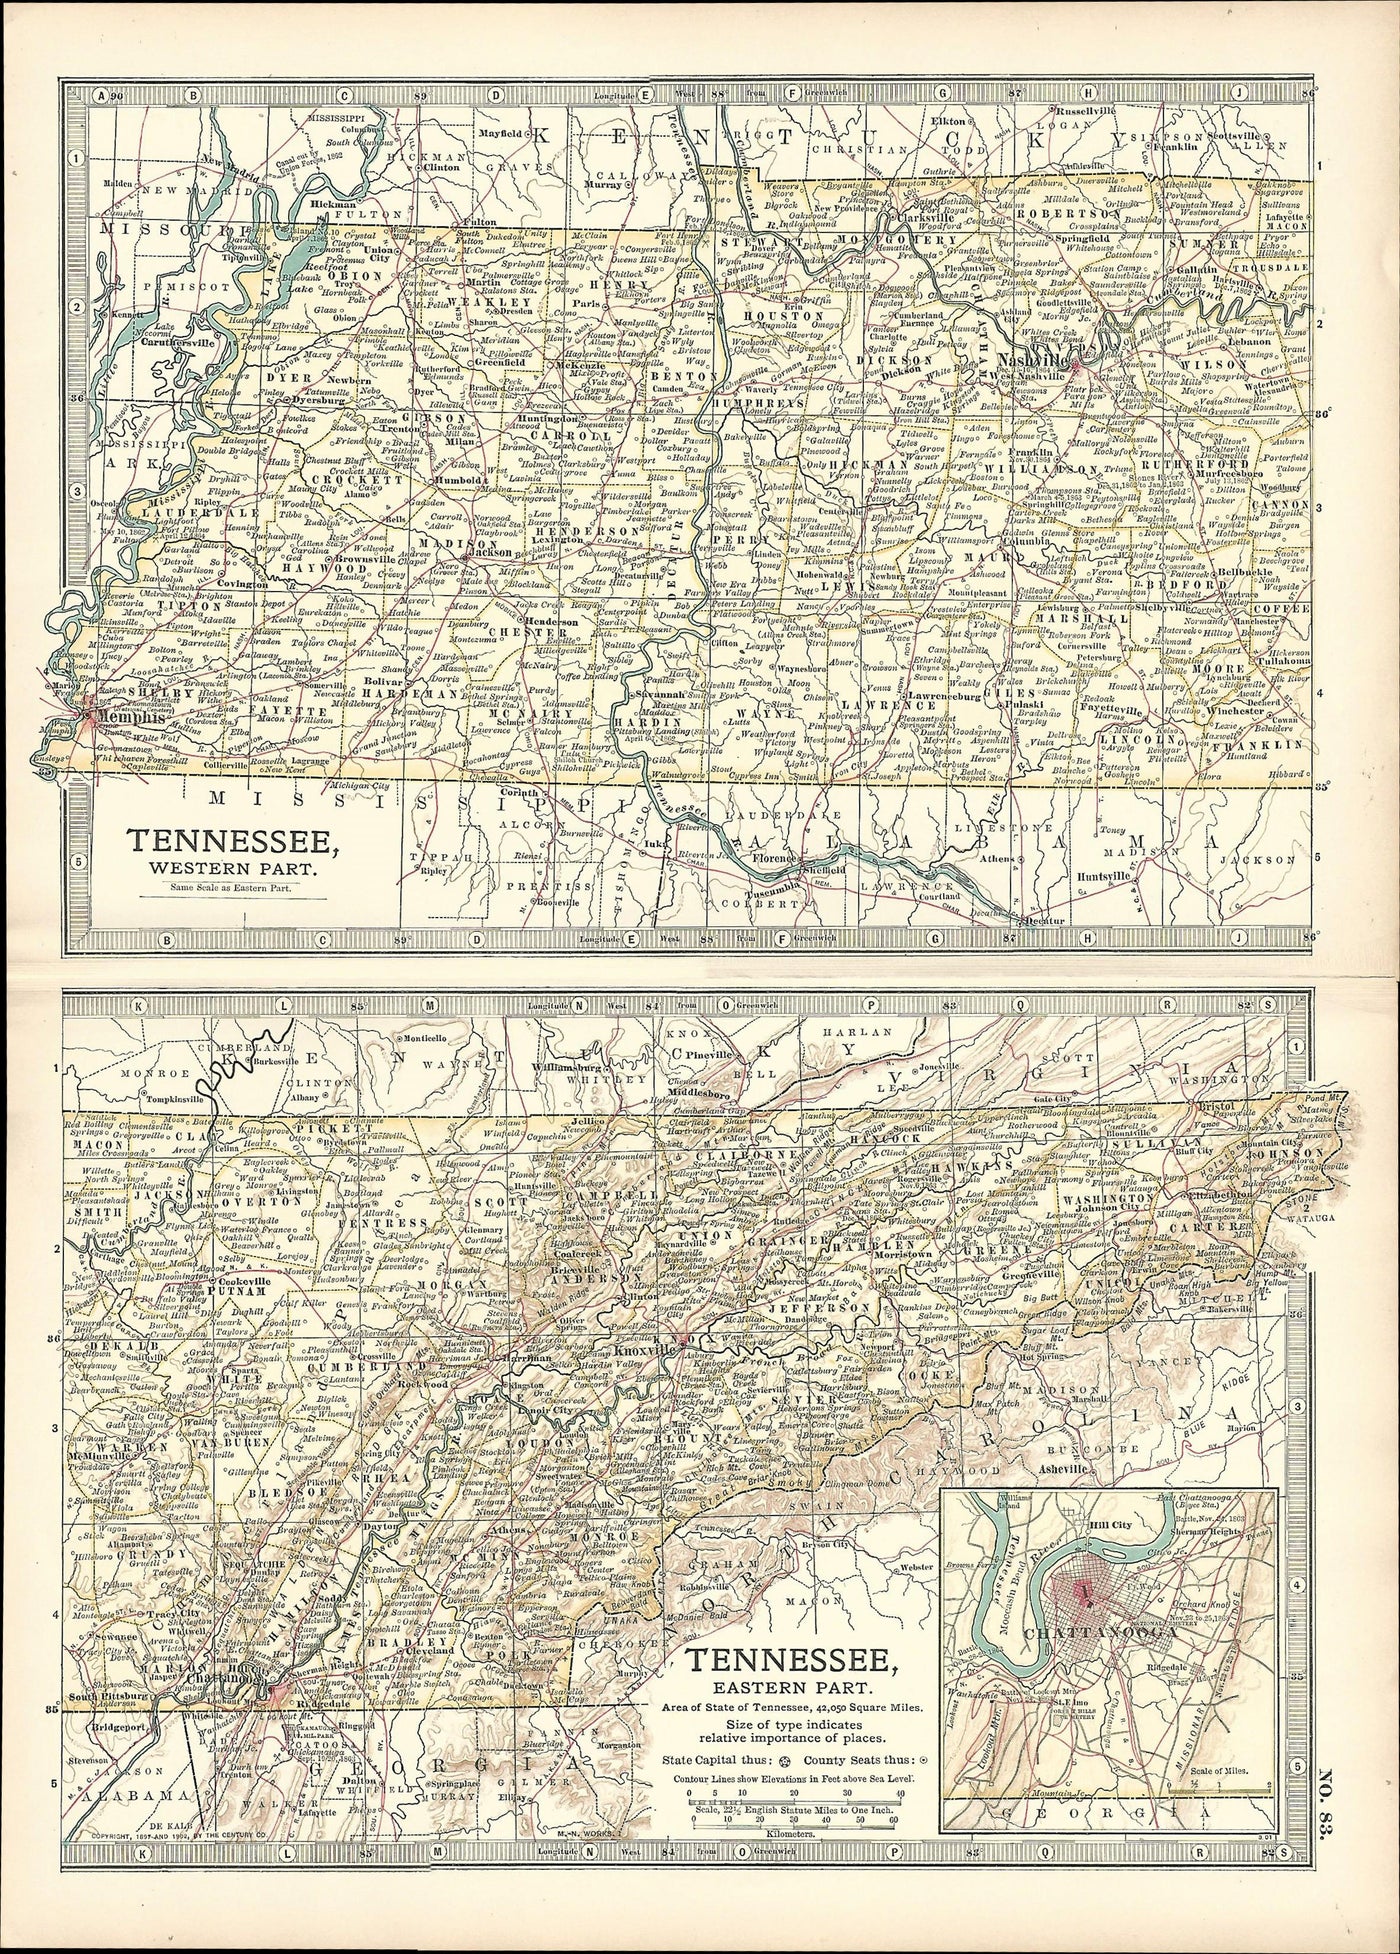 Tennessee antique map 1903 from Encyclopaedia Britannica 10th Editiion